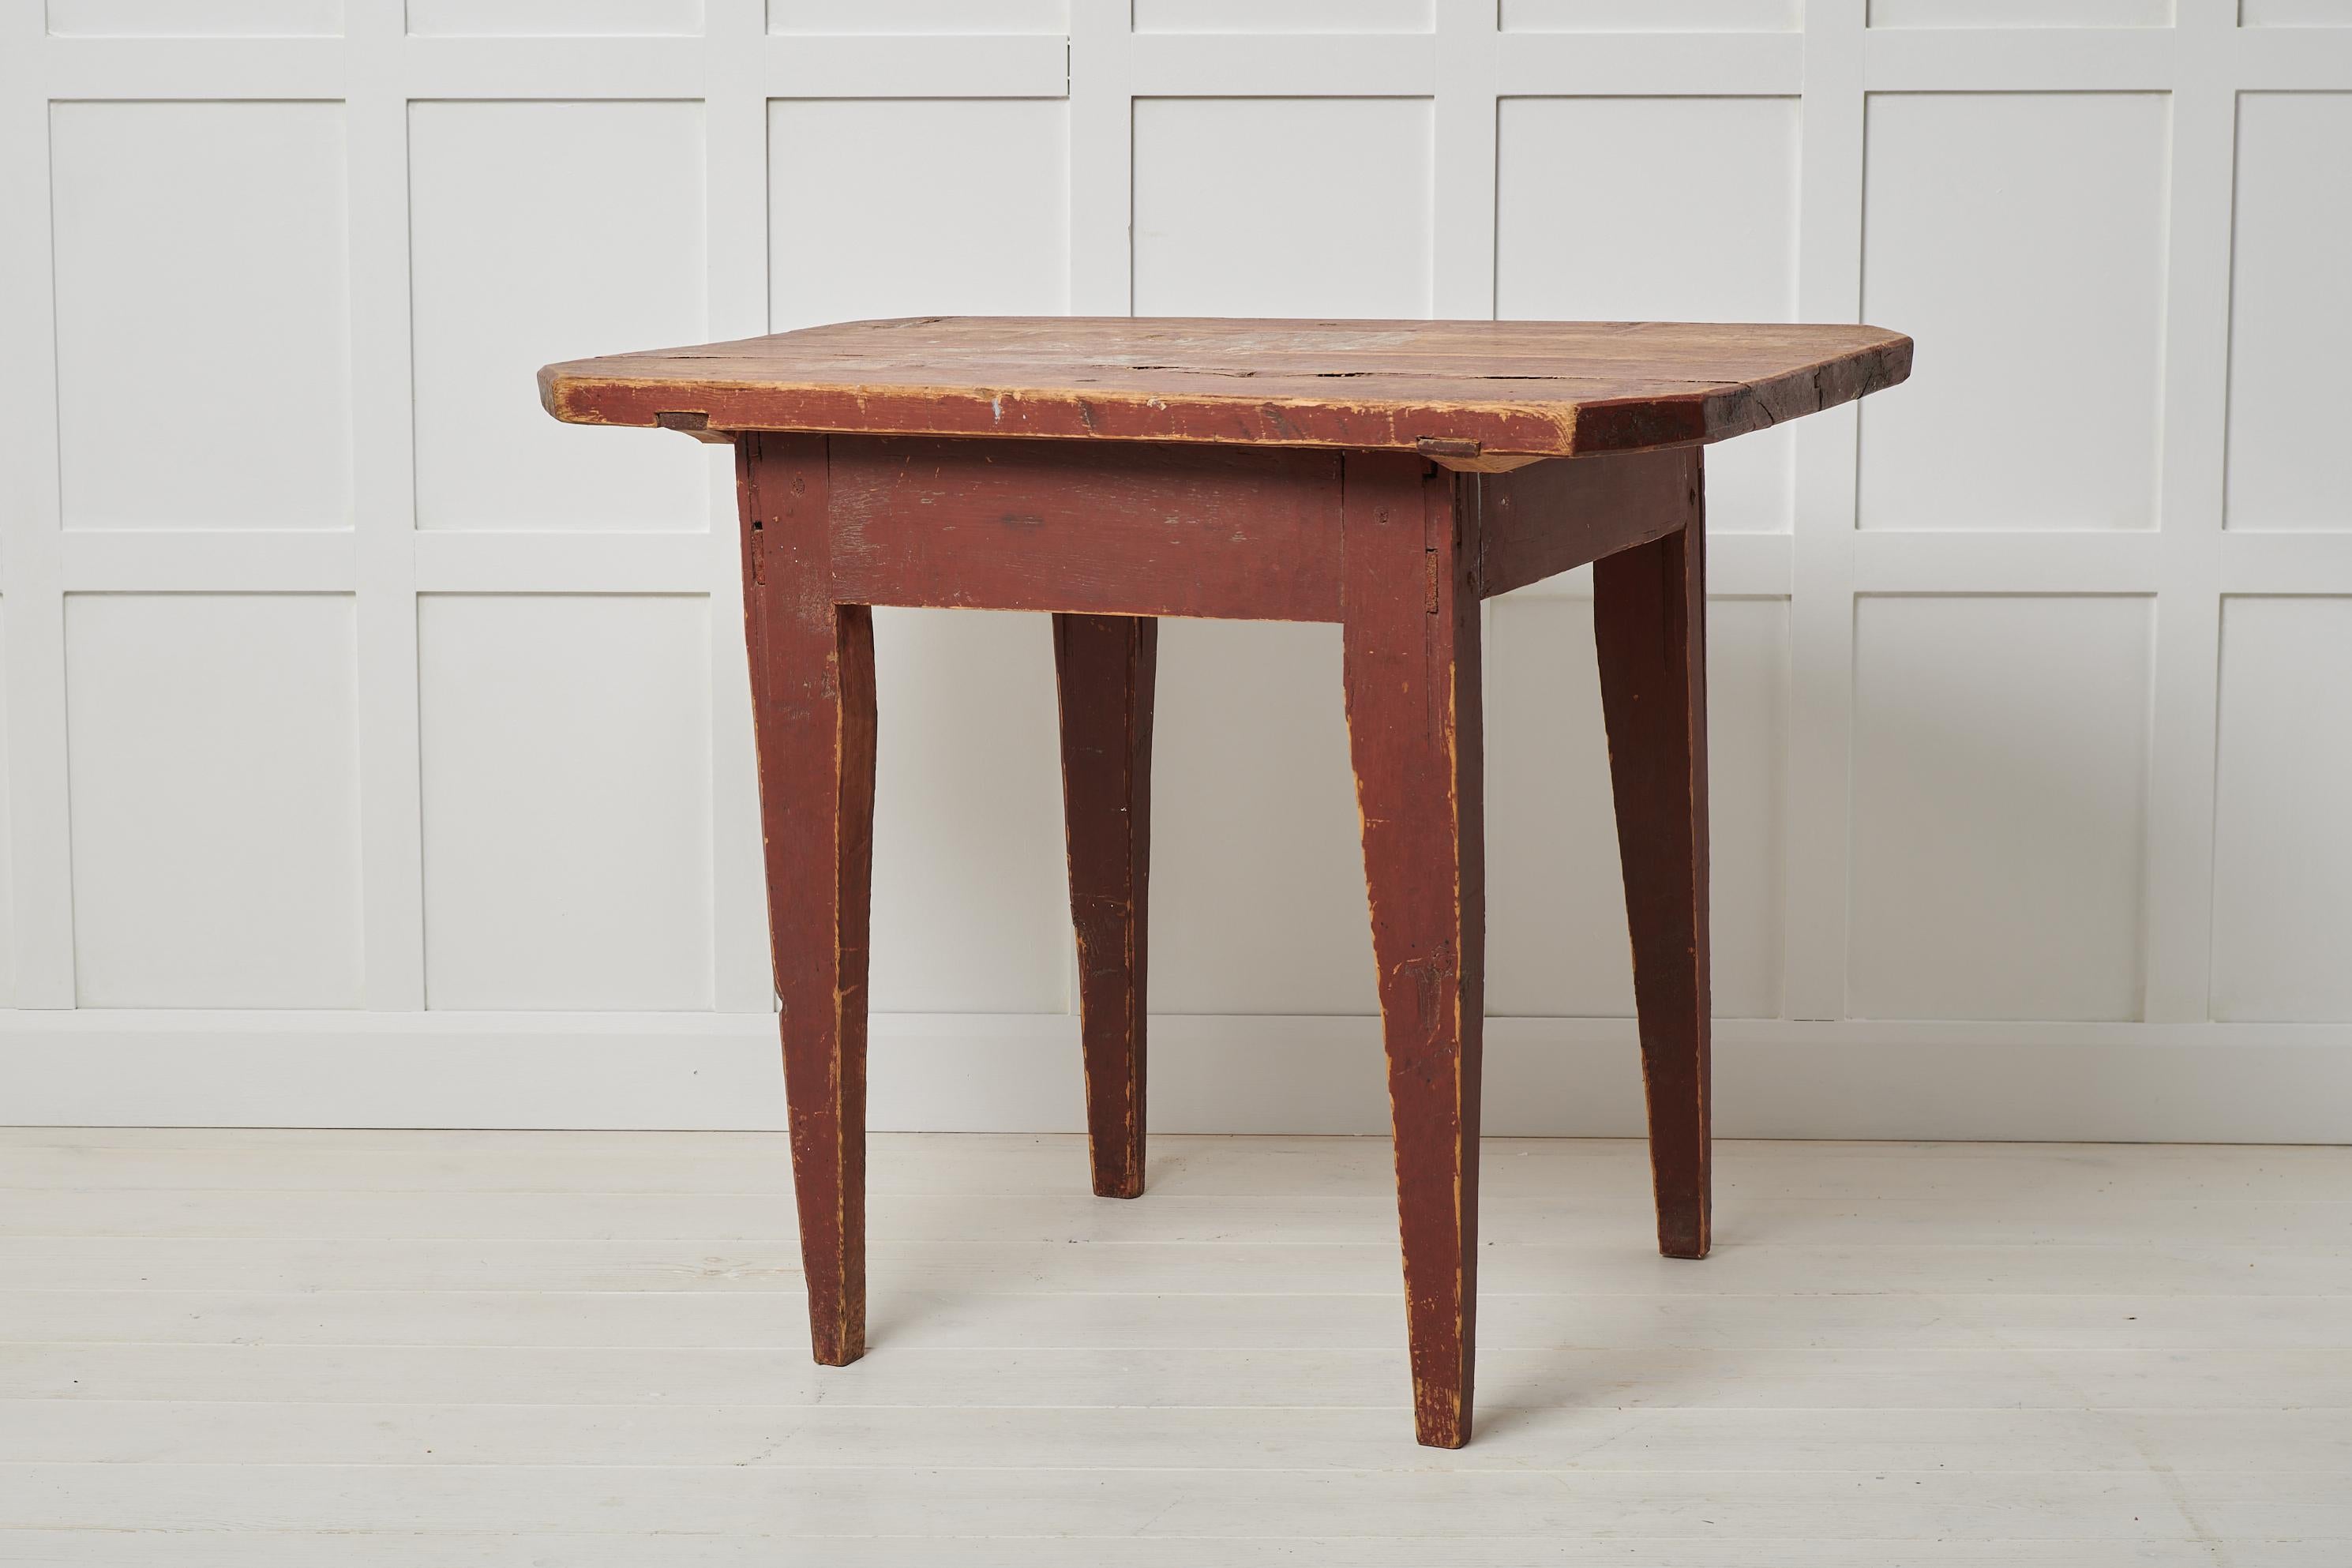 Antique Swedish primitive table in folk art. The table is a country furniture with a simple construction and a charmingly primitive appearance. The table is made by hand and is not completely symmetrical so the measurements vary slightly. The frame